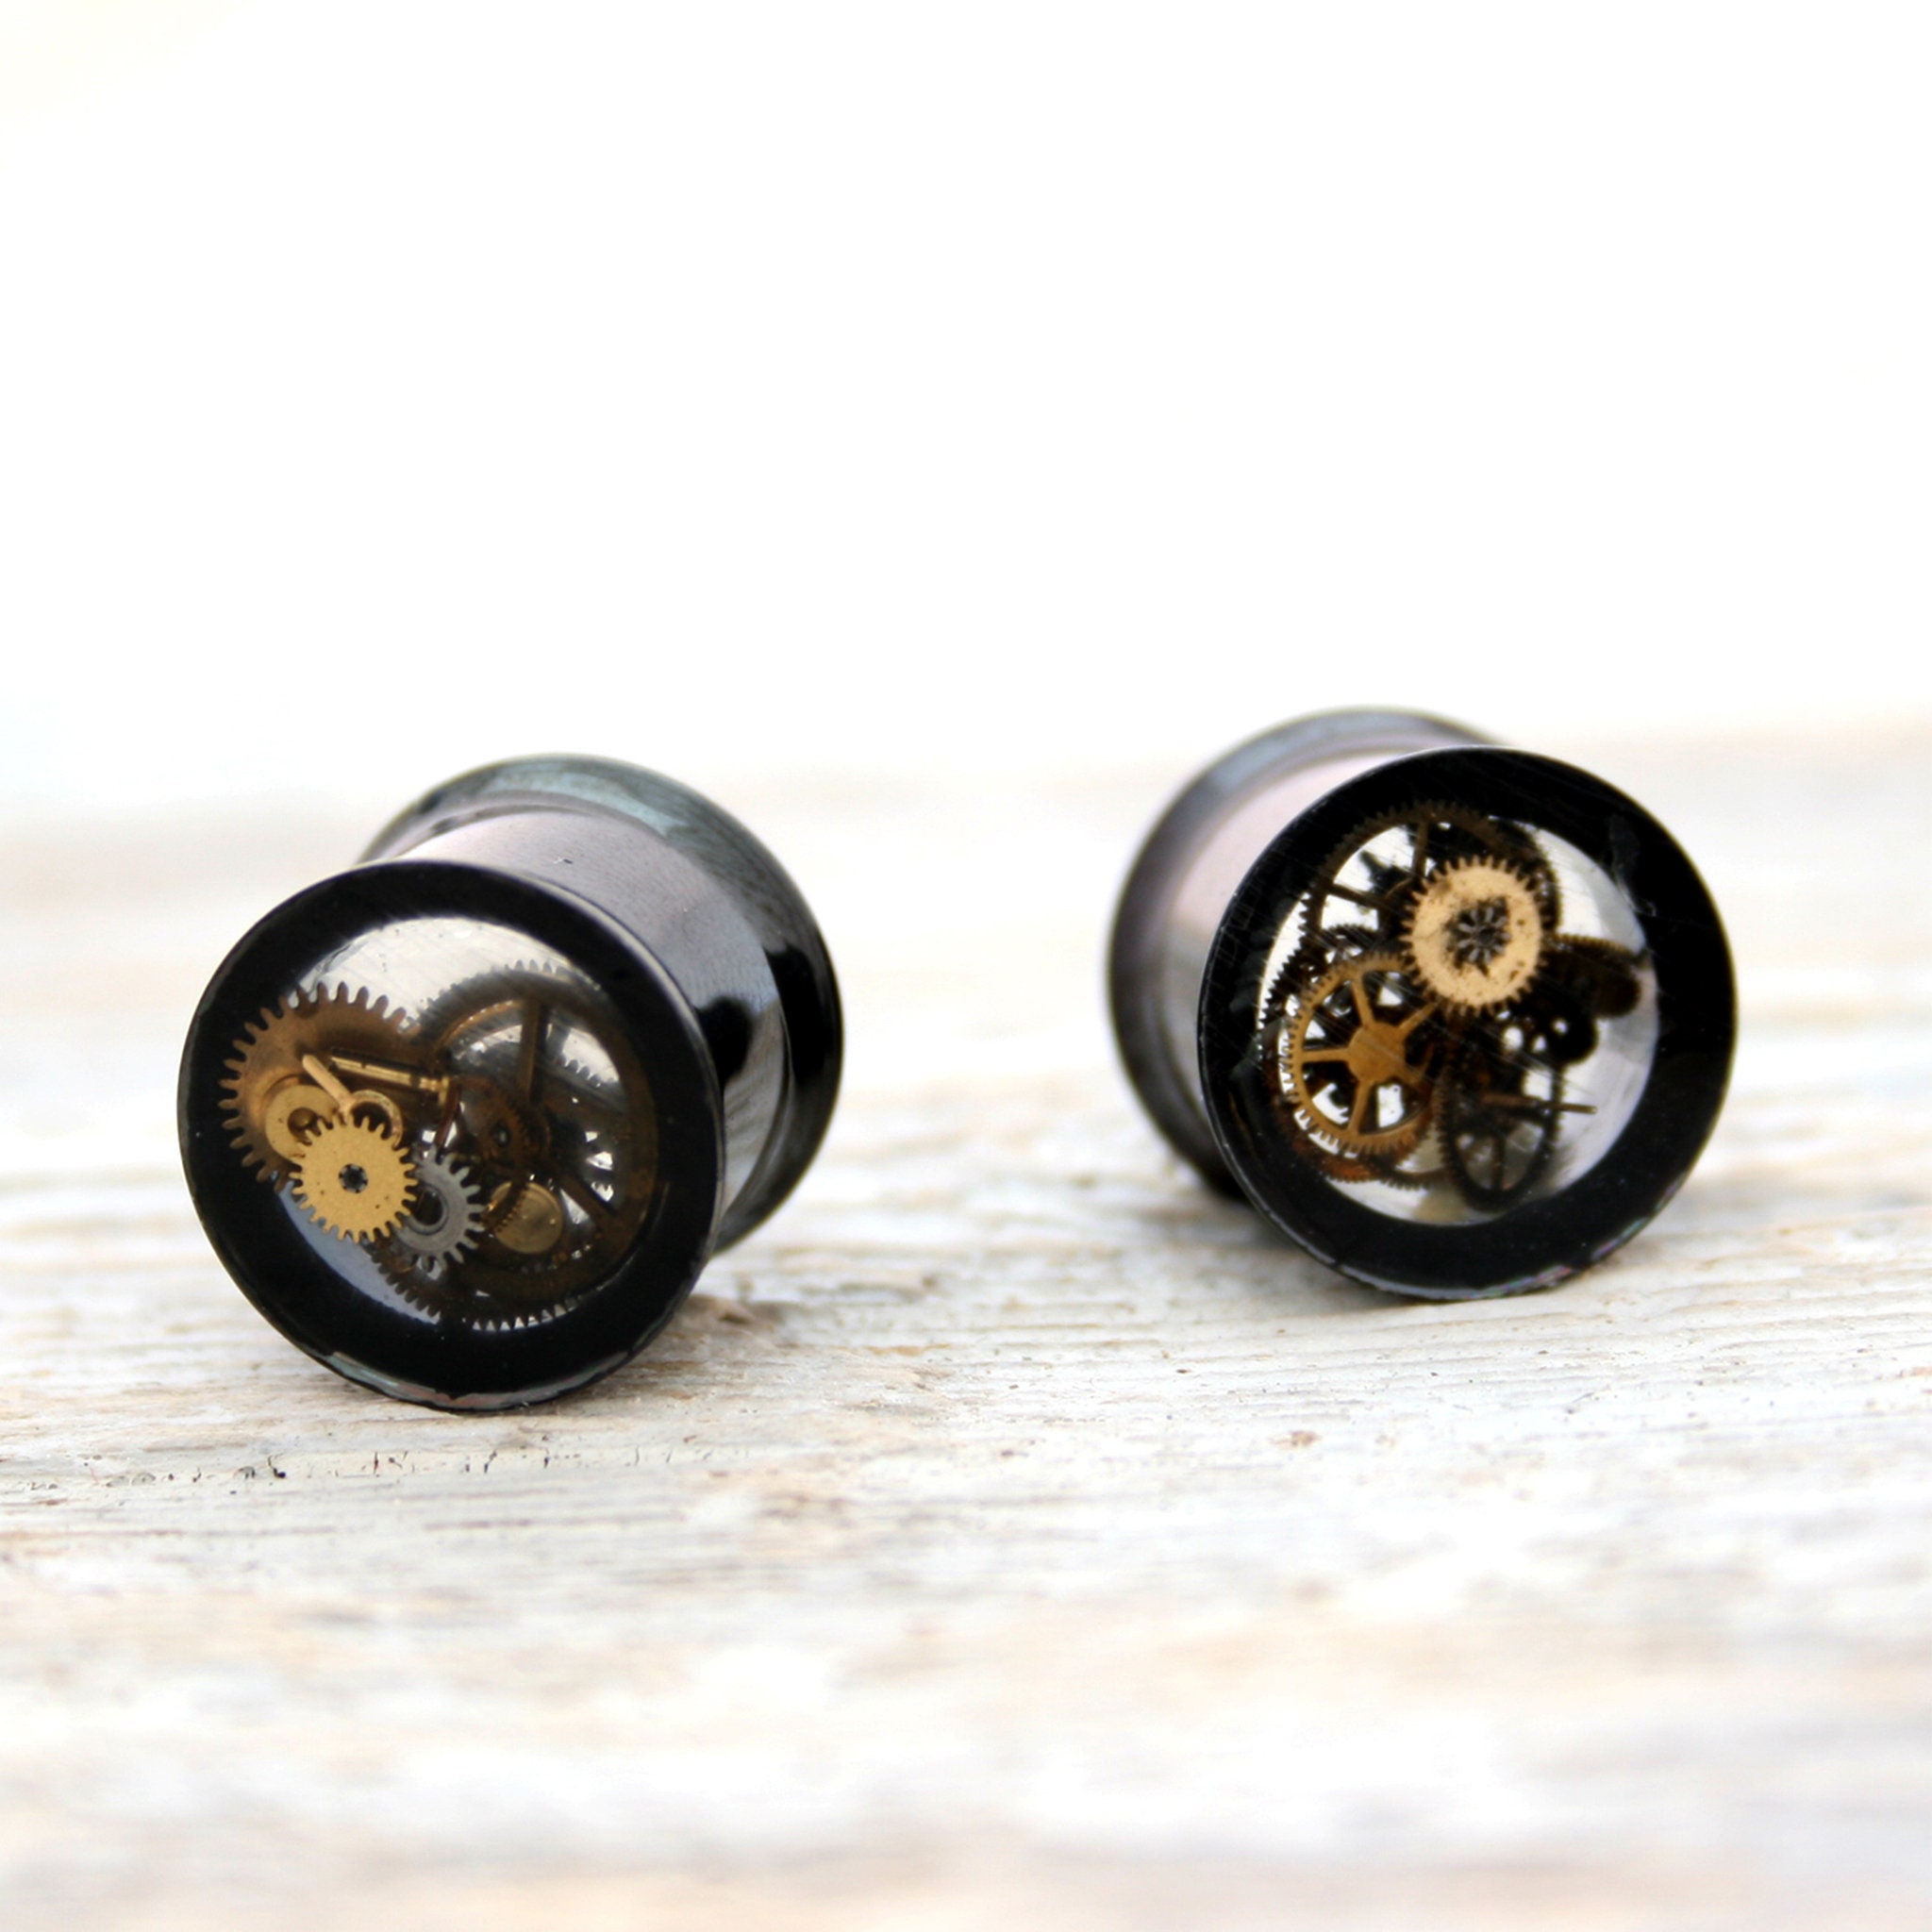 12mm Plugs 1/2 Black Silver Clear Rhinestones PAIR Gauges Studs Ear Hiders Tunnels Faceted Stones Stretched Ears Gift Single Flare gift box 2 pc Elegant Unique Fancy Wedding 12 mm 